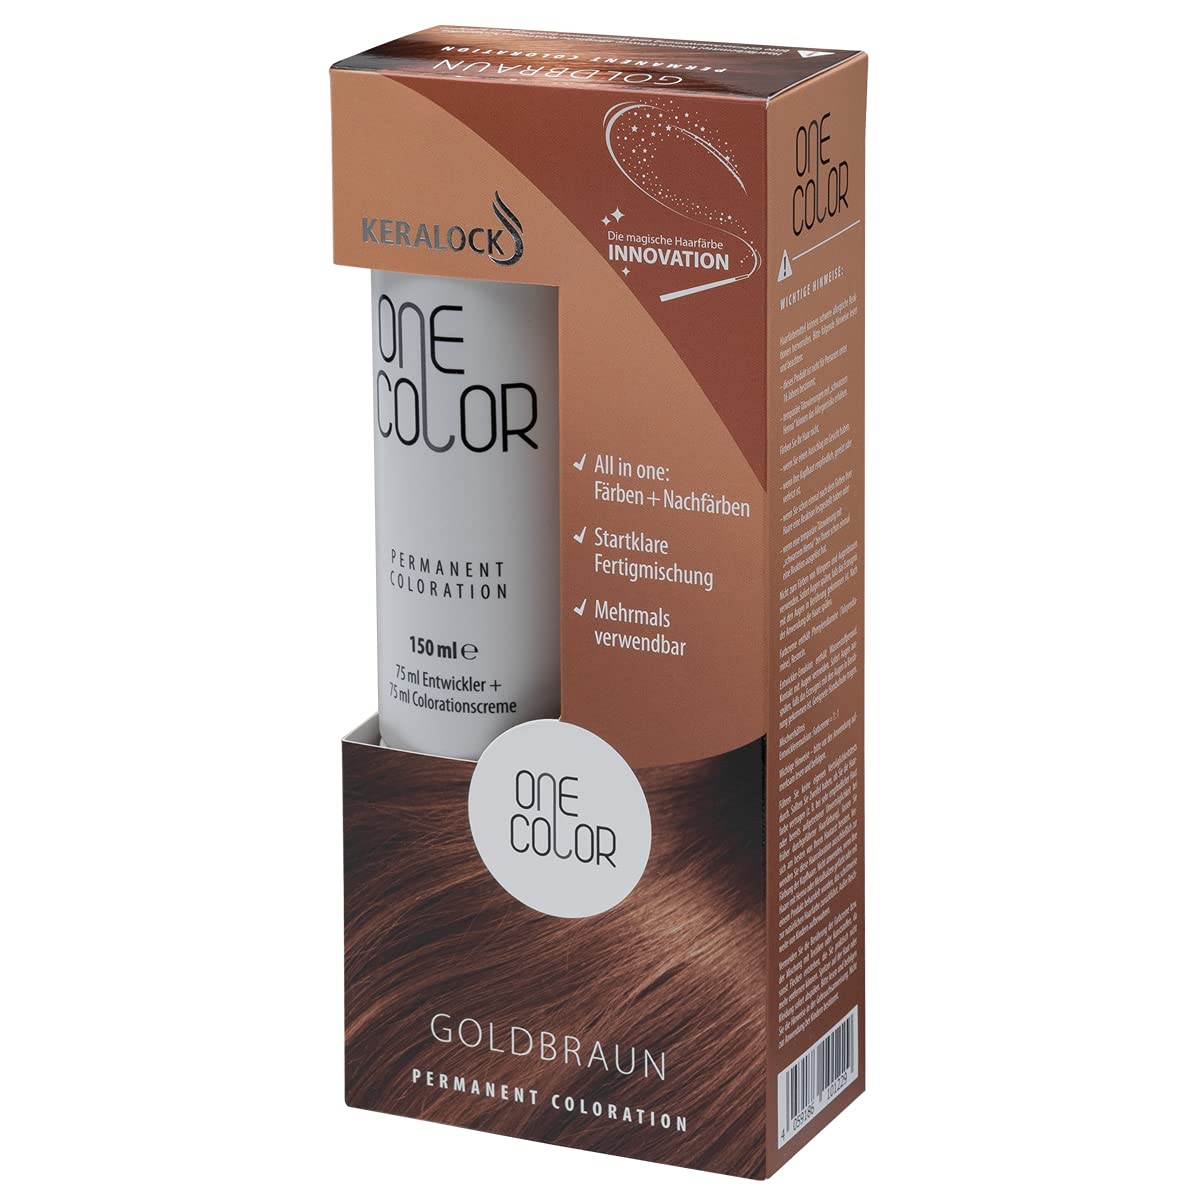 One colour by Keralock permanent colouration (golden brown), brown ‎golden